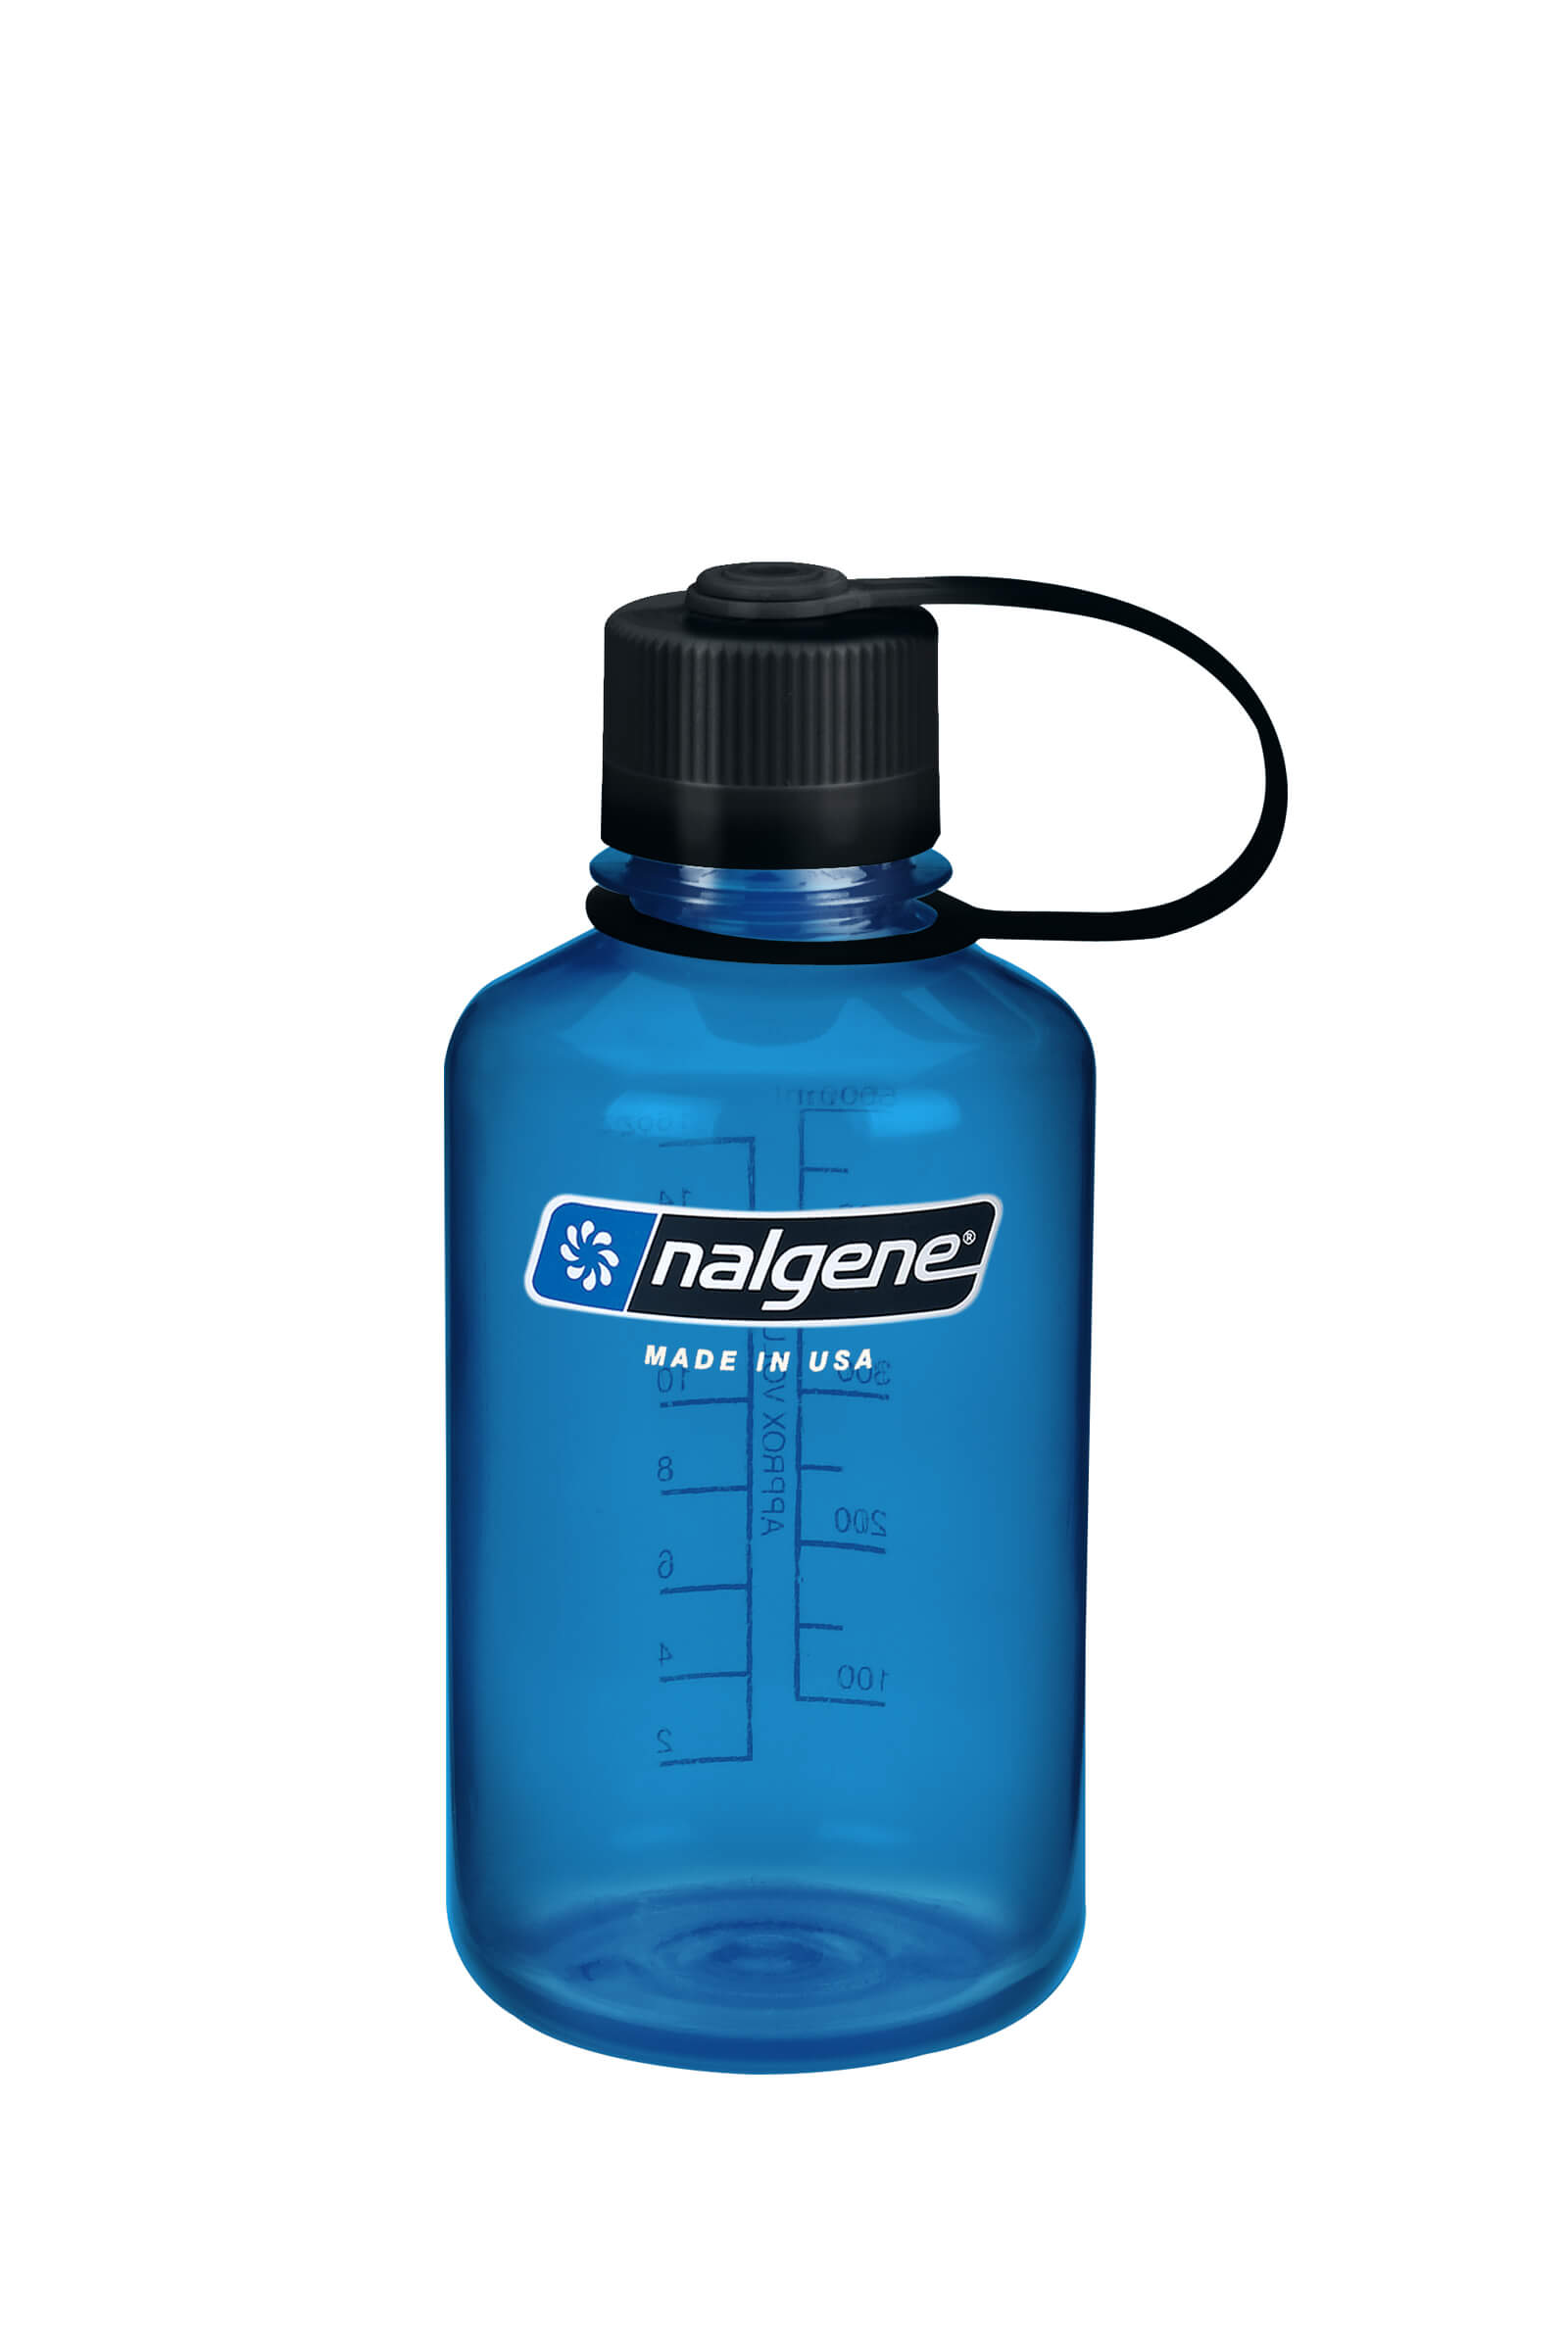 Nalgene Narrow Mouth Water Bottle 1 Pint Gray With Black Lid for sale online 